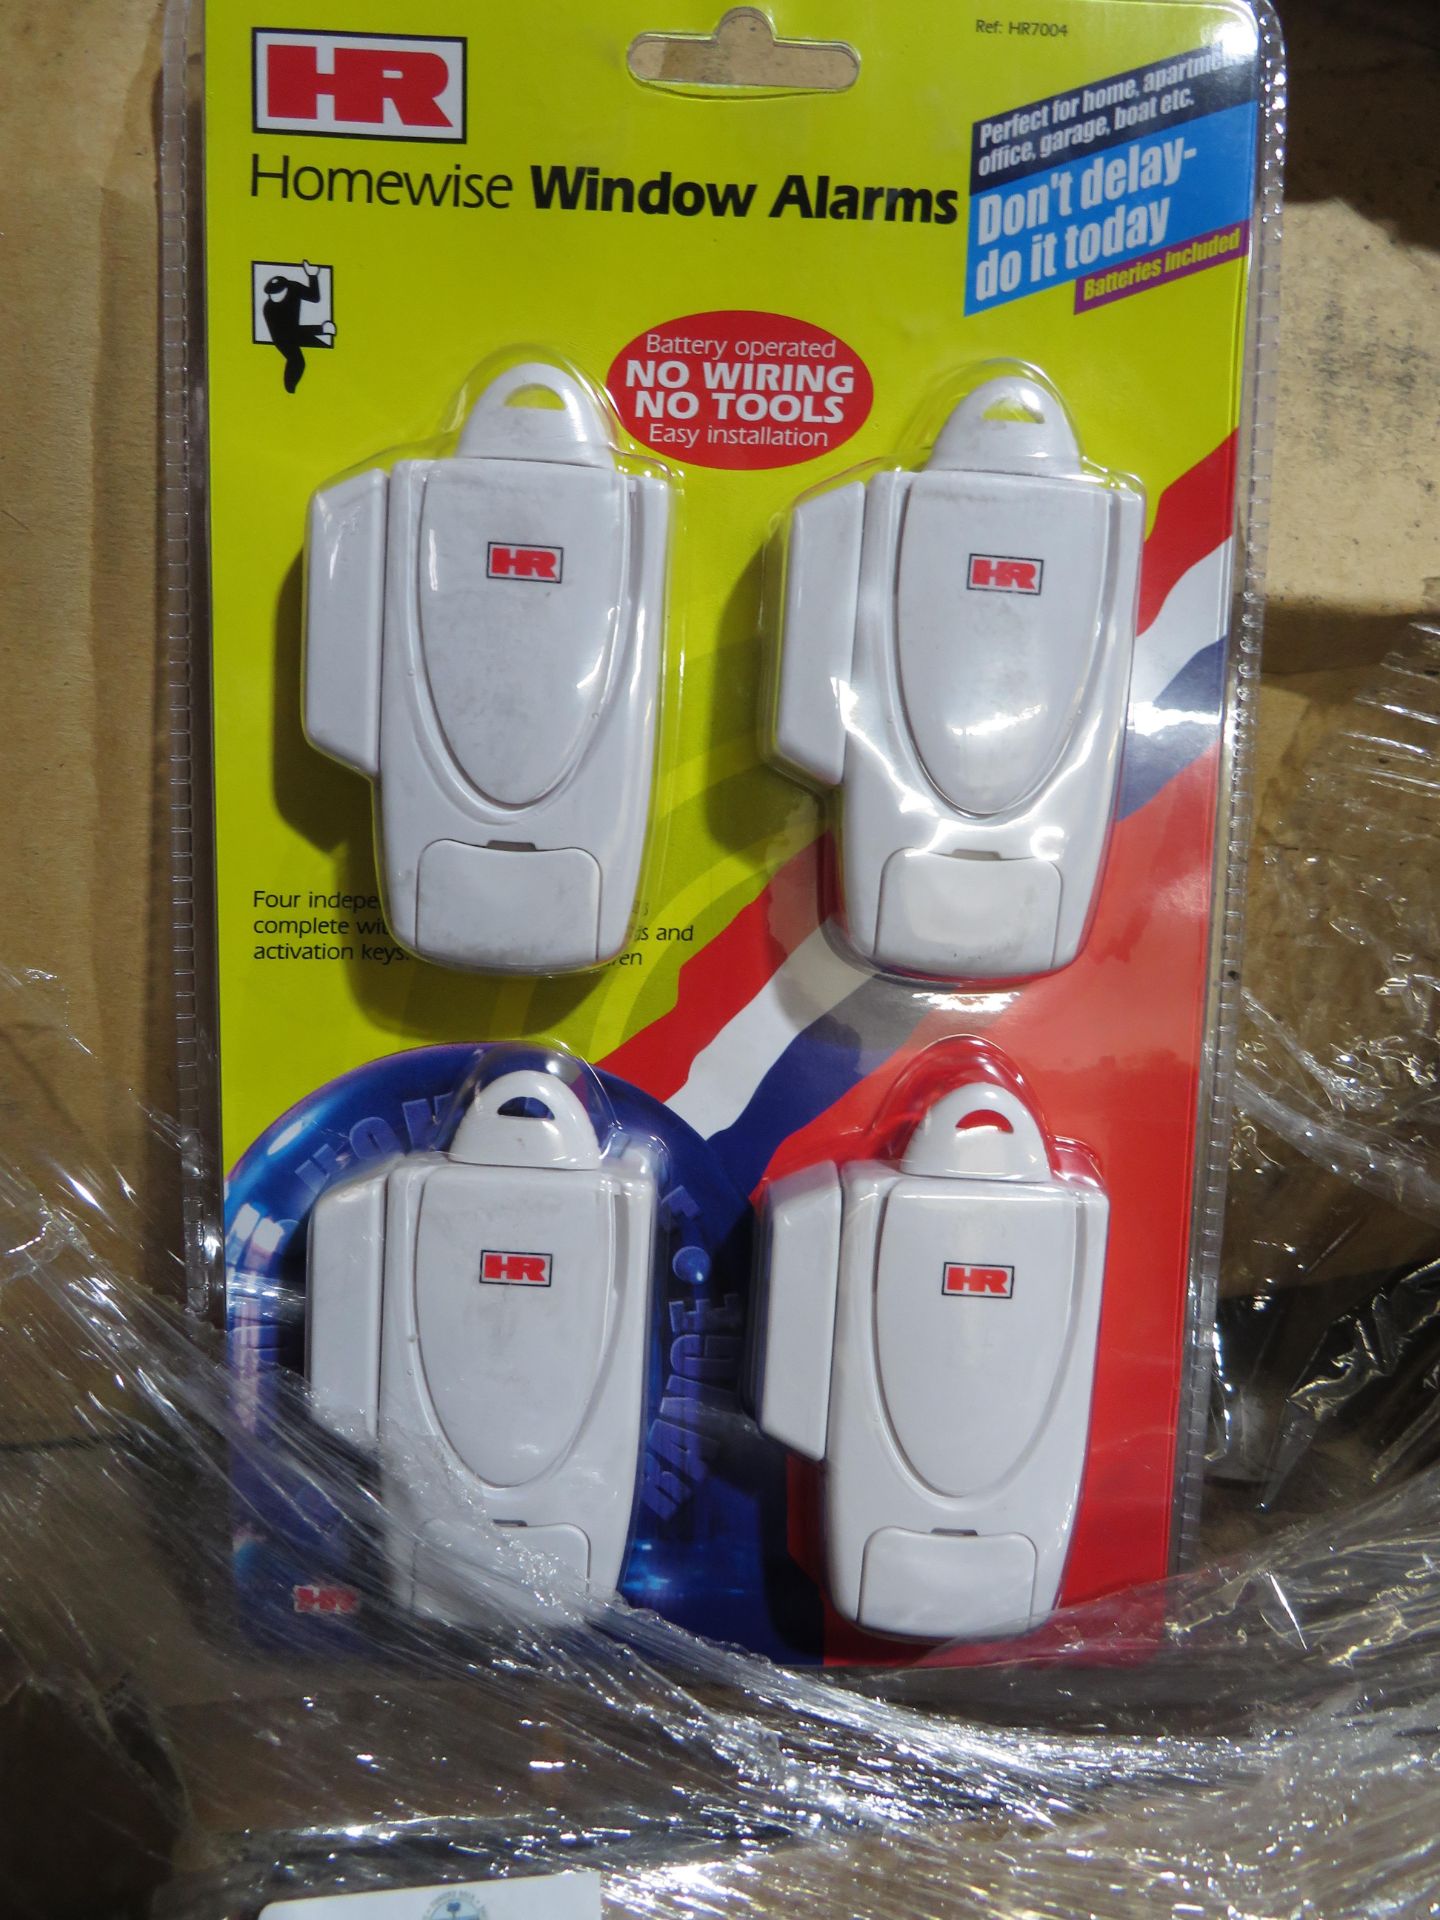 Box of 40x packs of 4 home wise window alarms, still sealed in packaging.